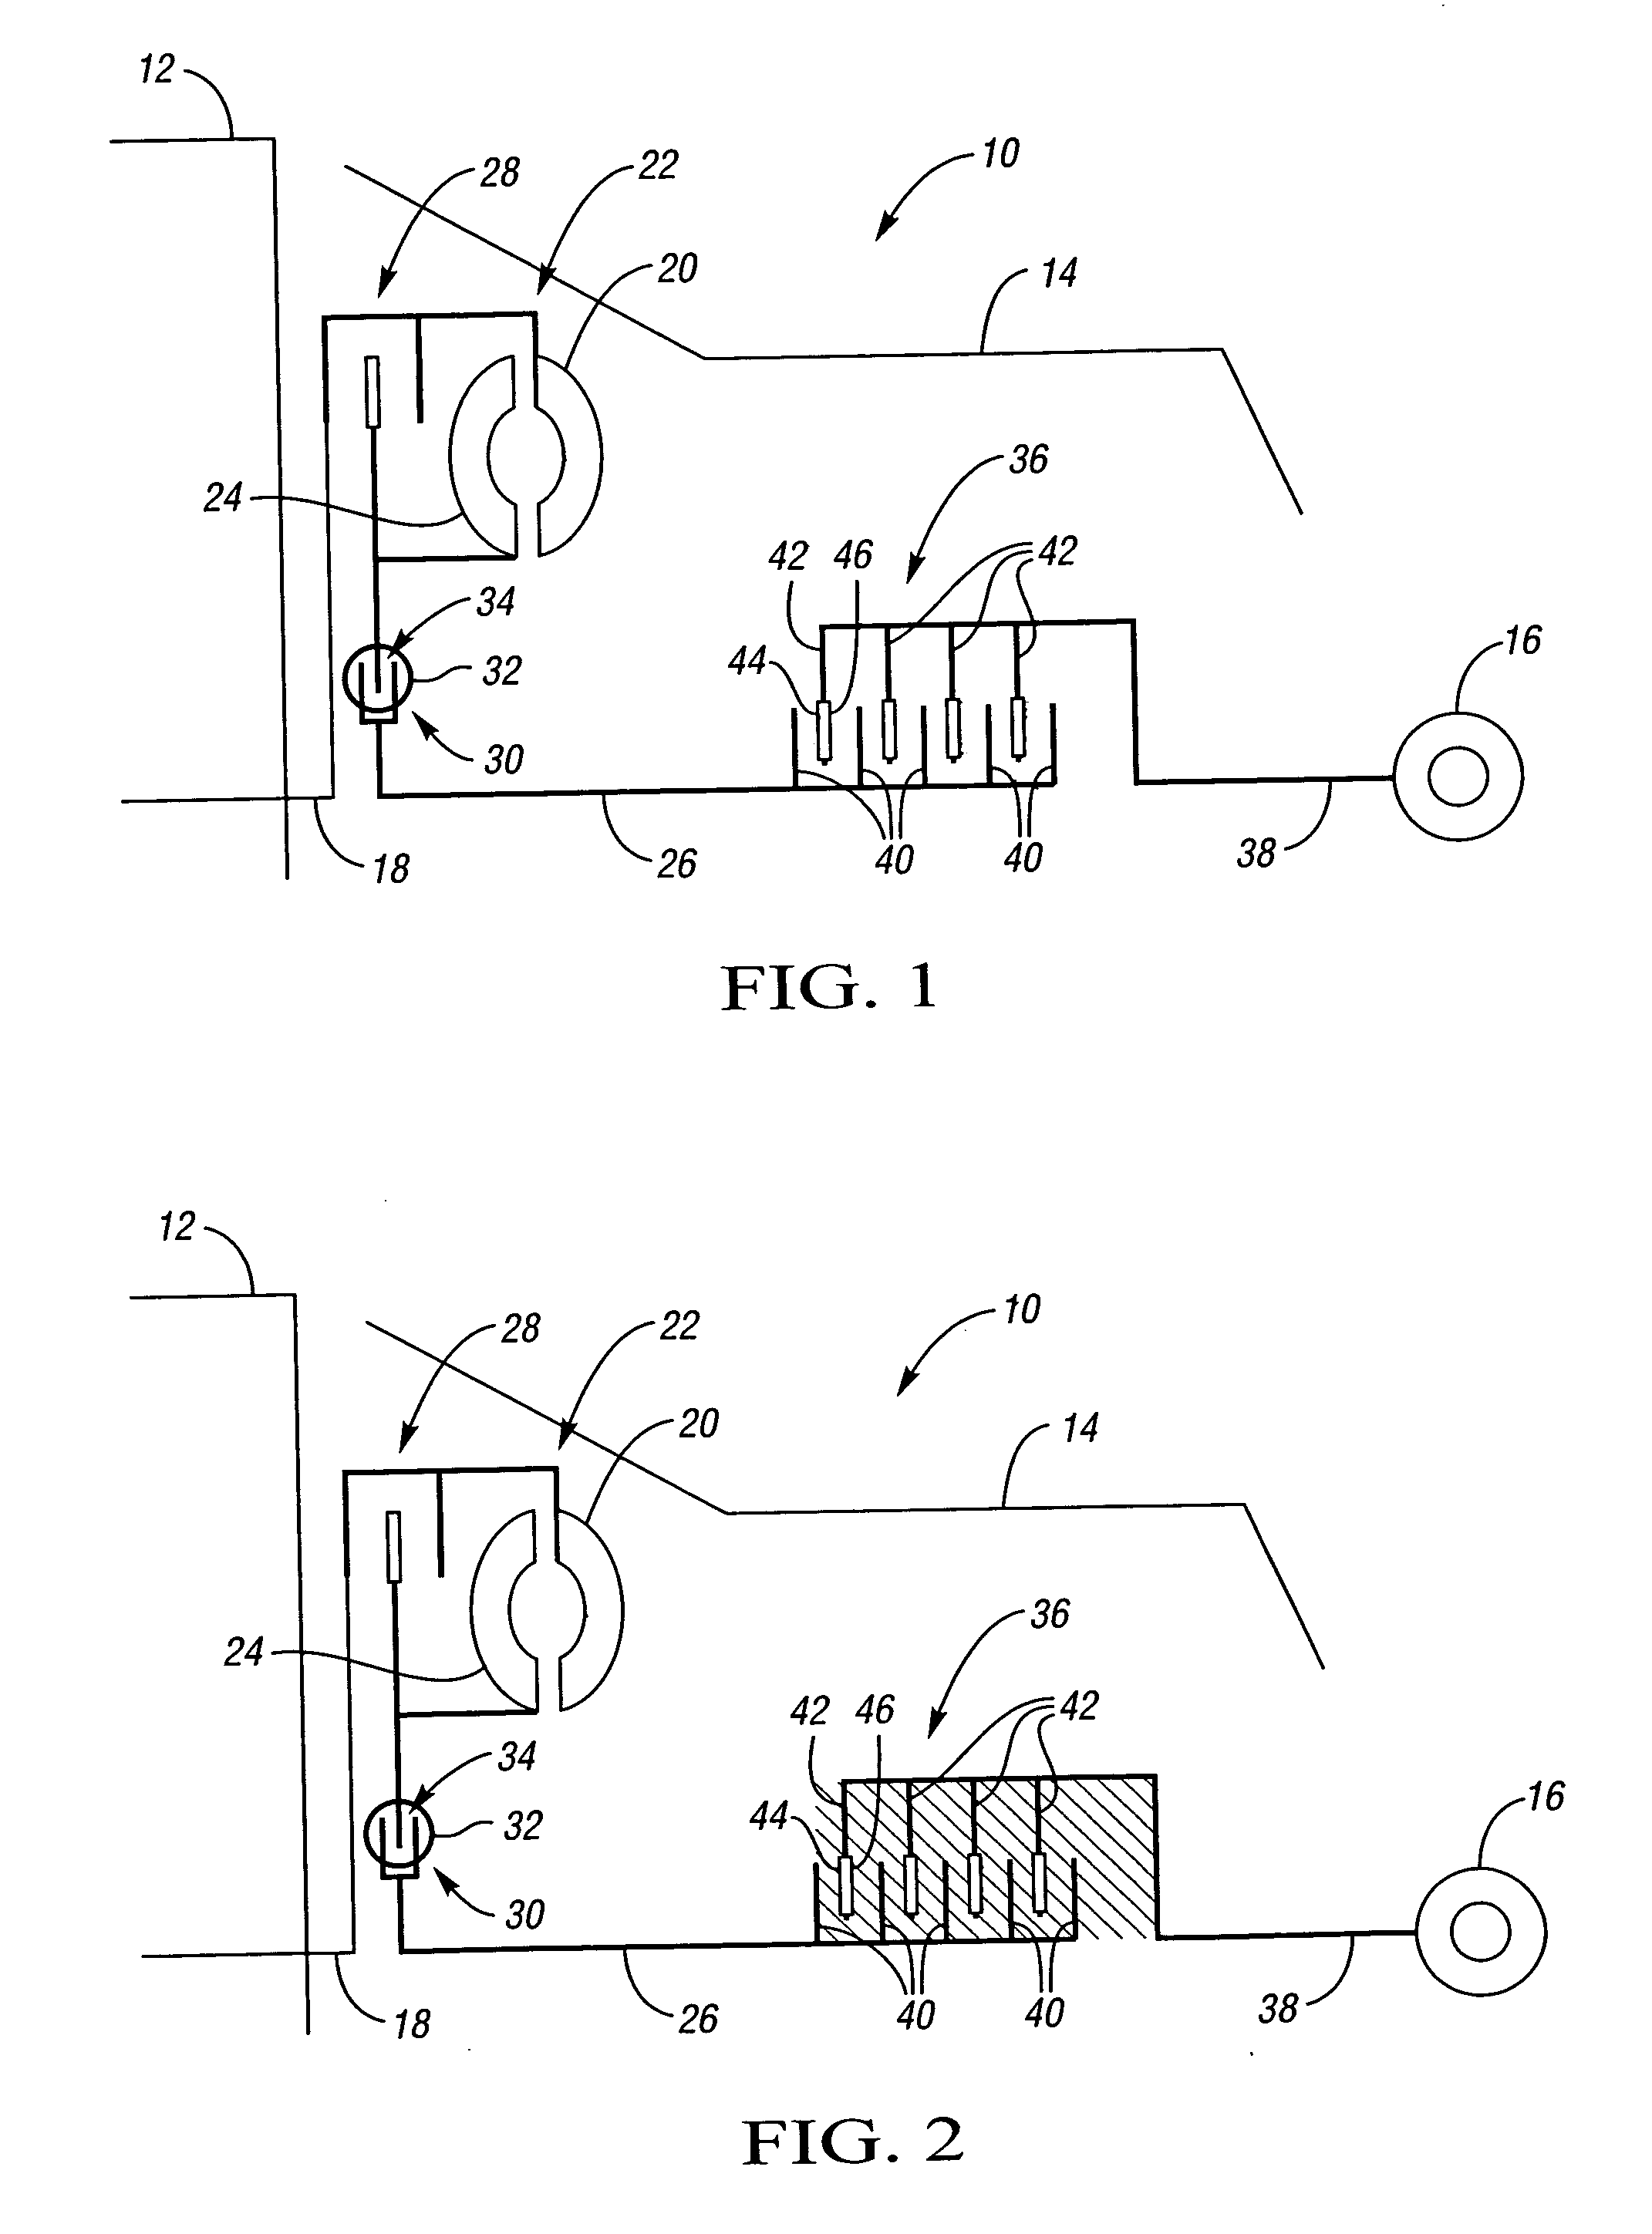 Mechanism and method of controlling an automatic shifting power transmission to effect a first gear launch